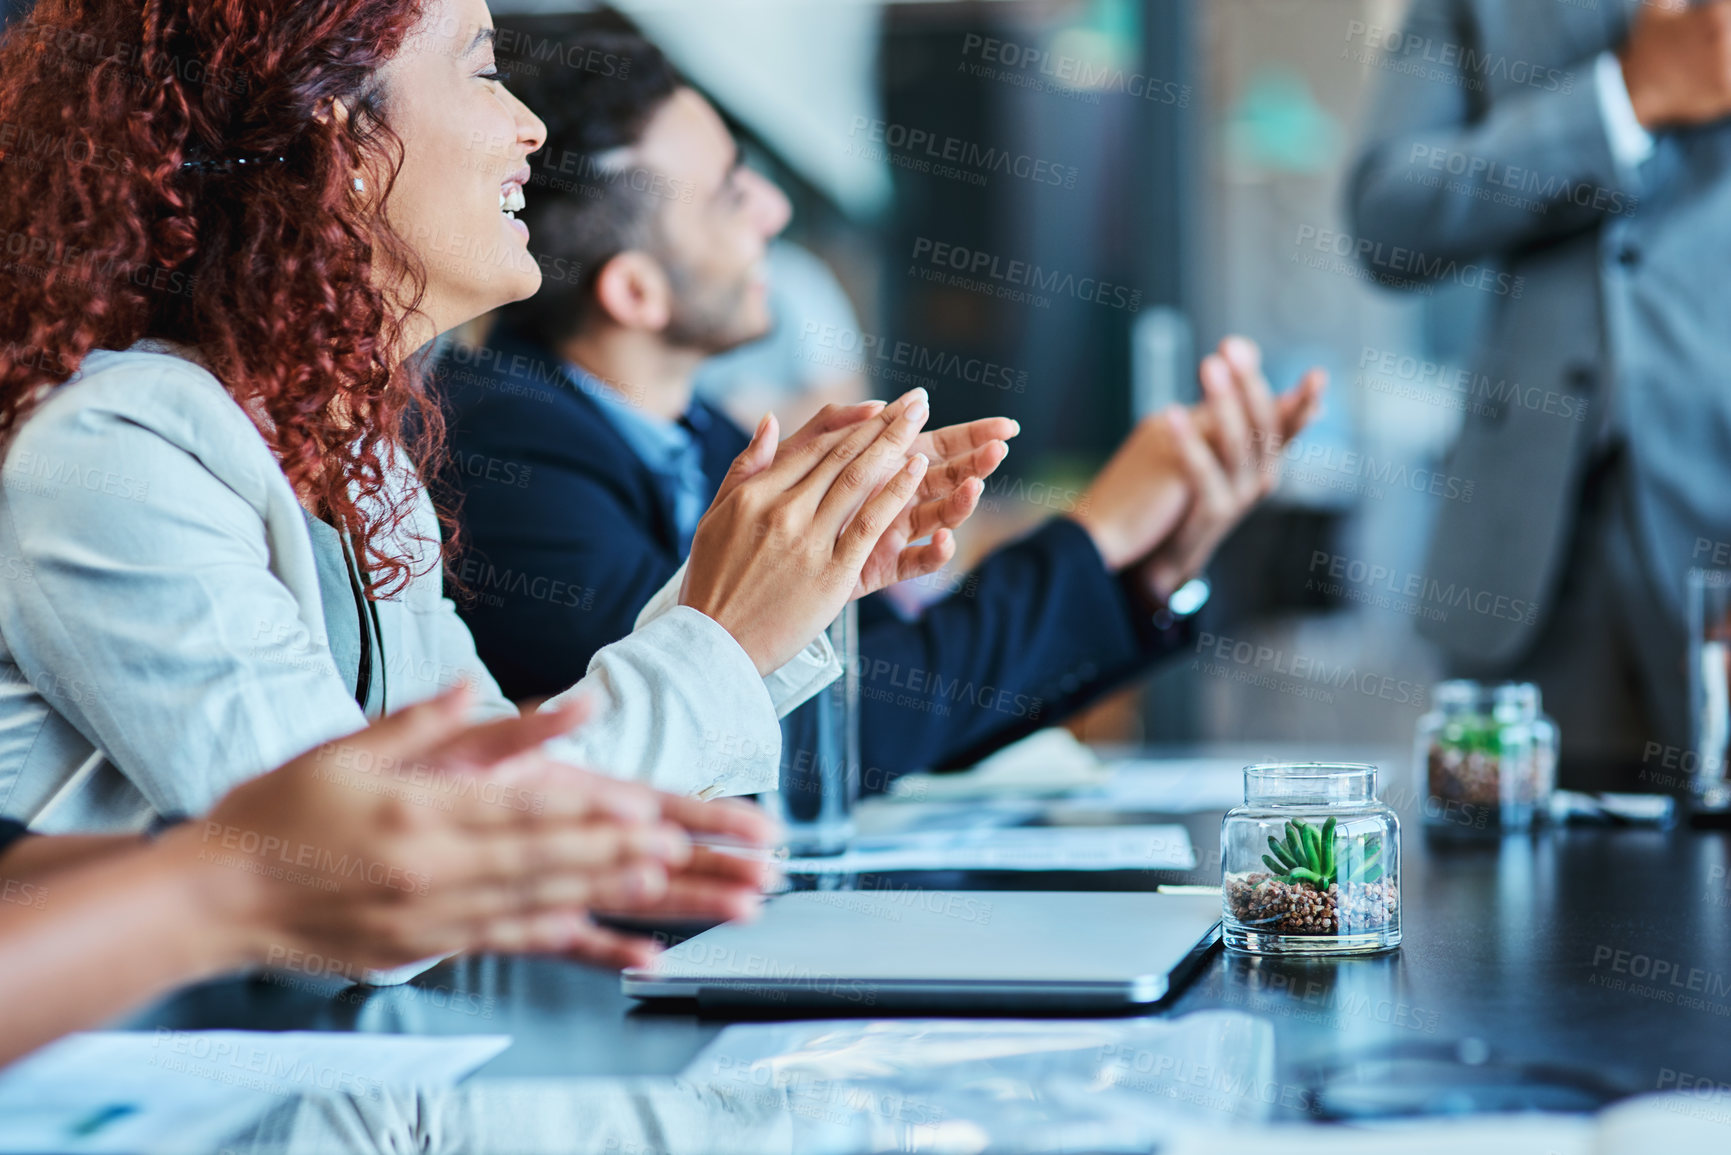 Buy stock photo Shot of a group of businesspeople applauding during a meeting in an office